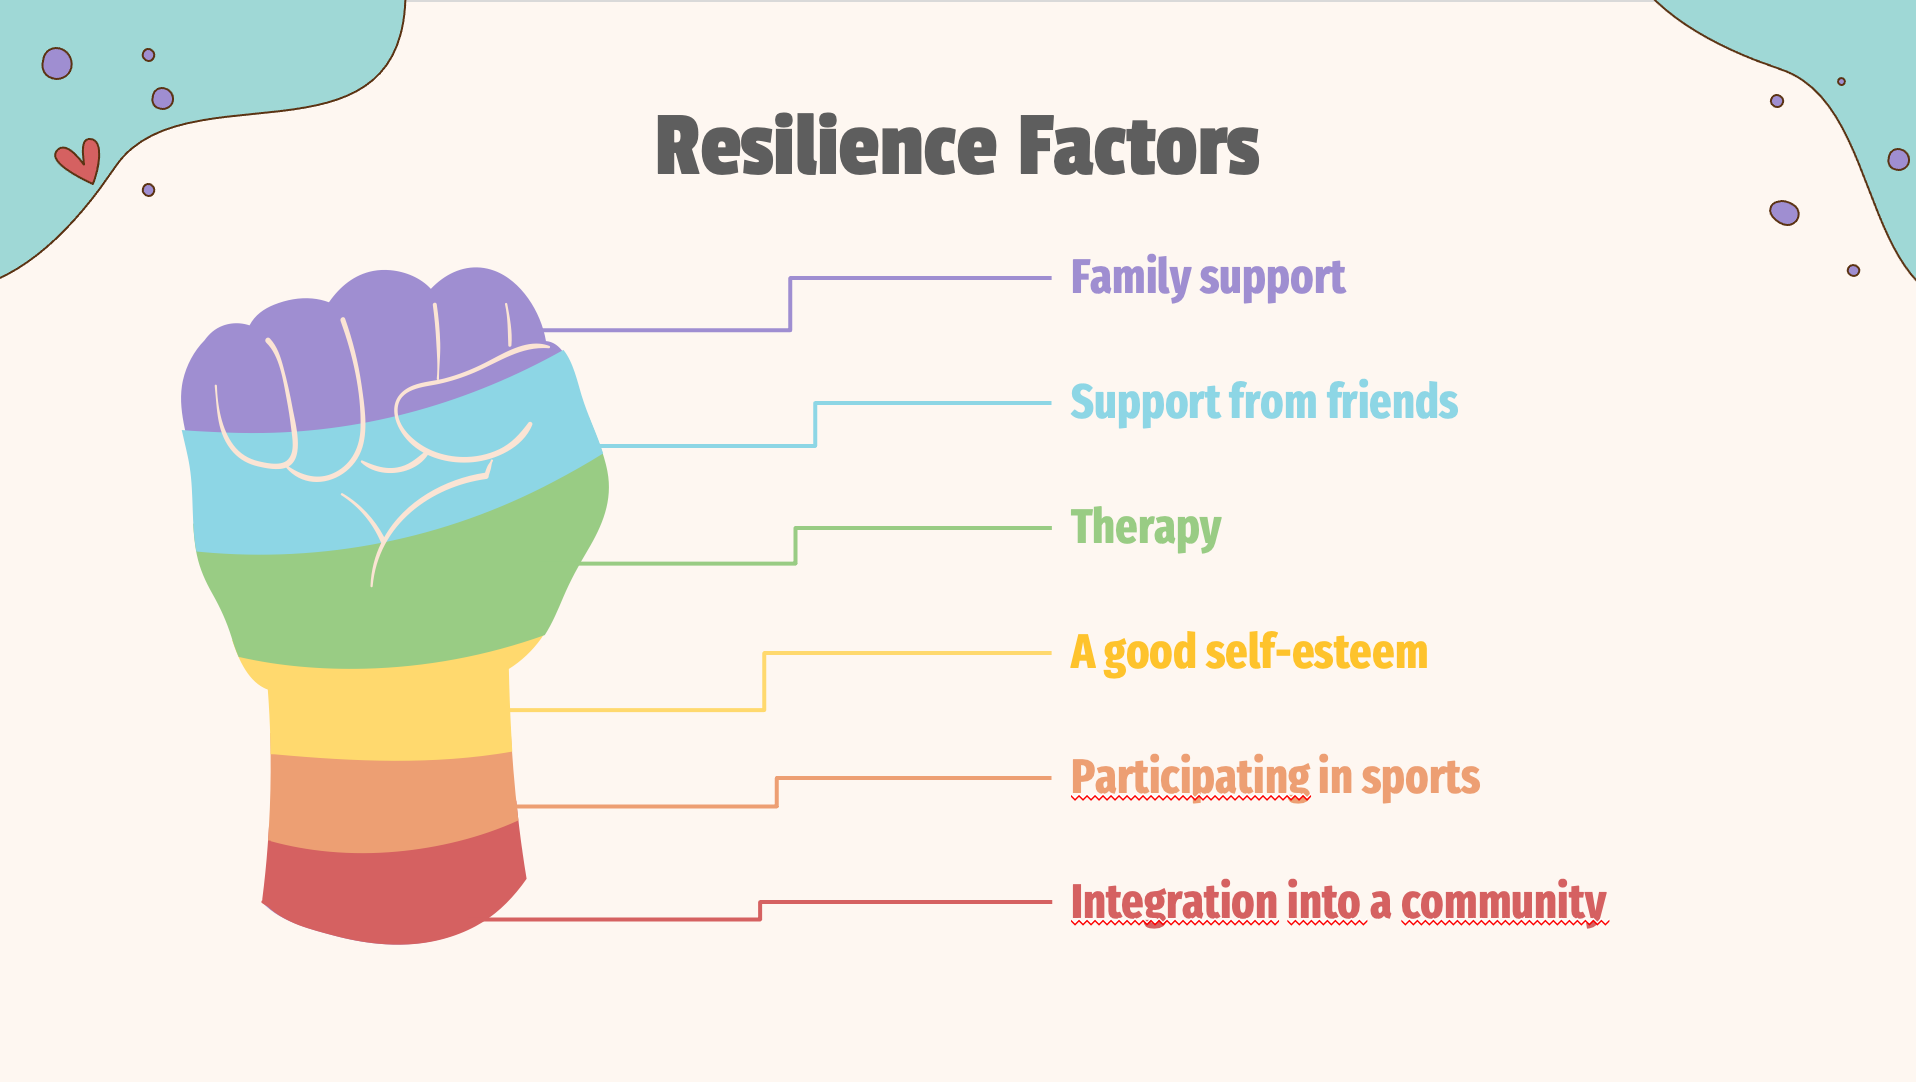 Figure representing the resilience factors